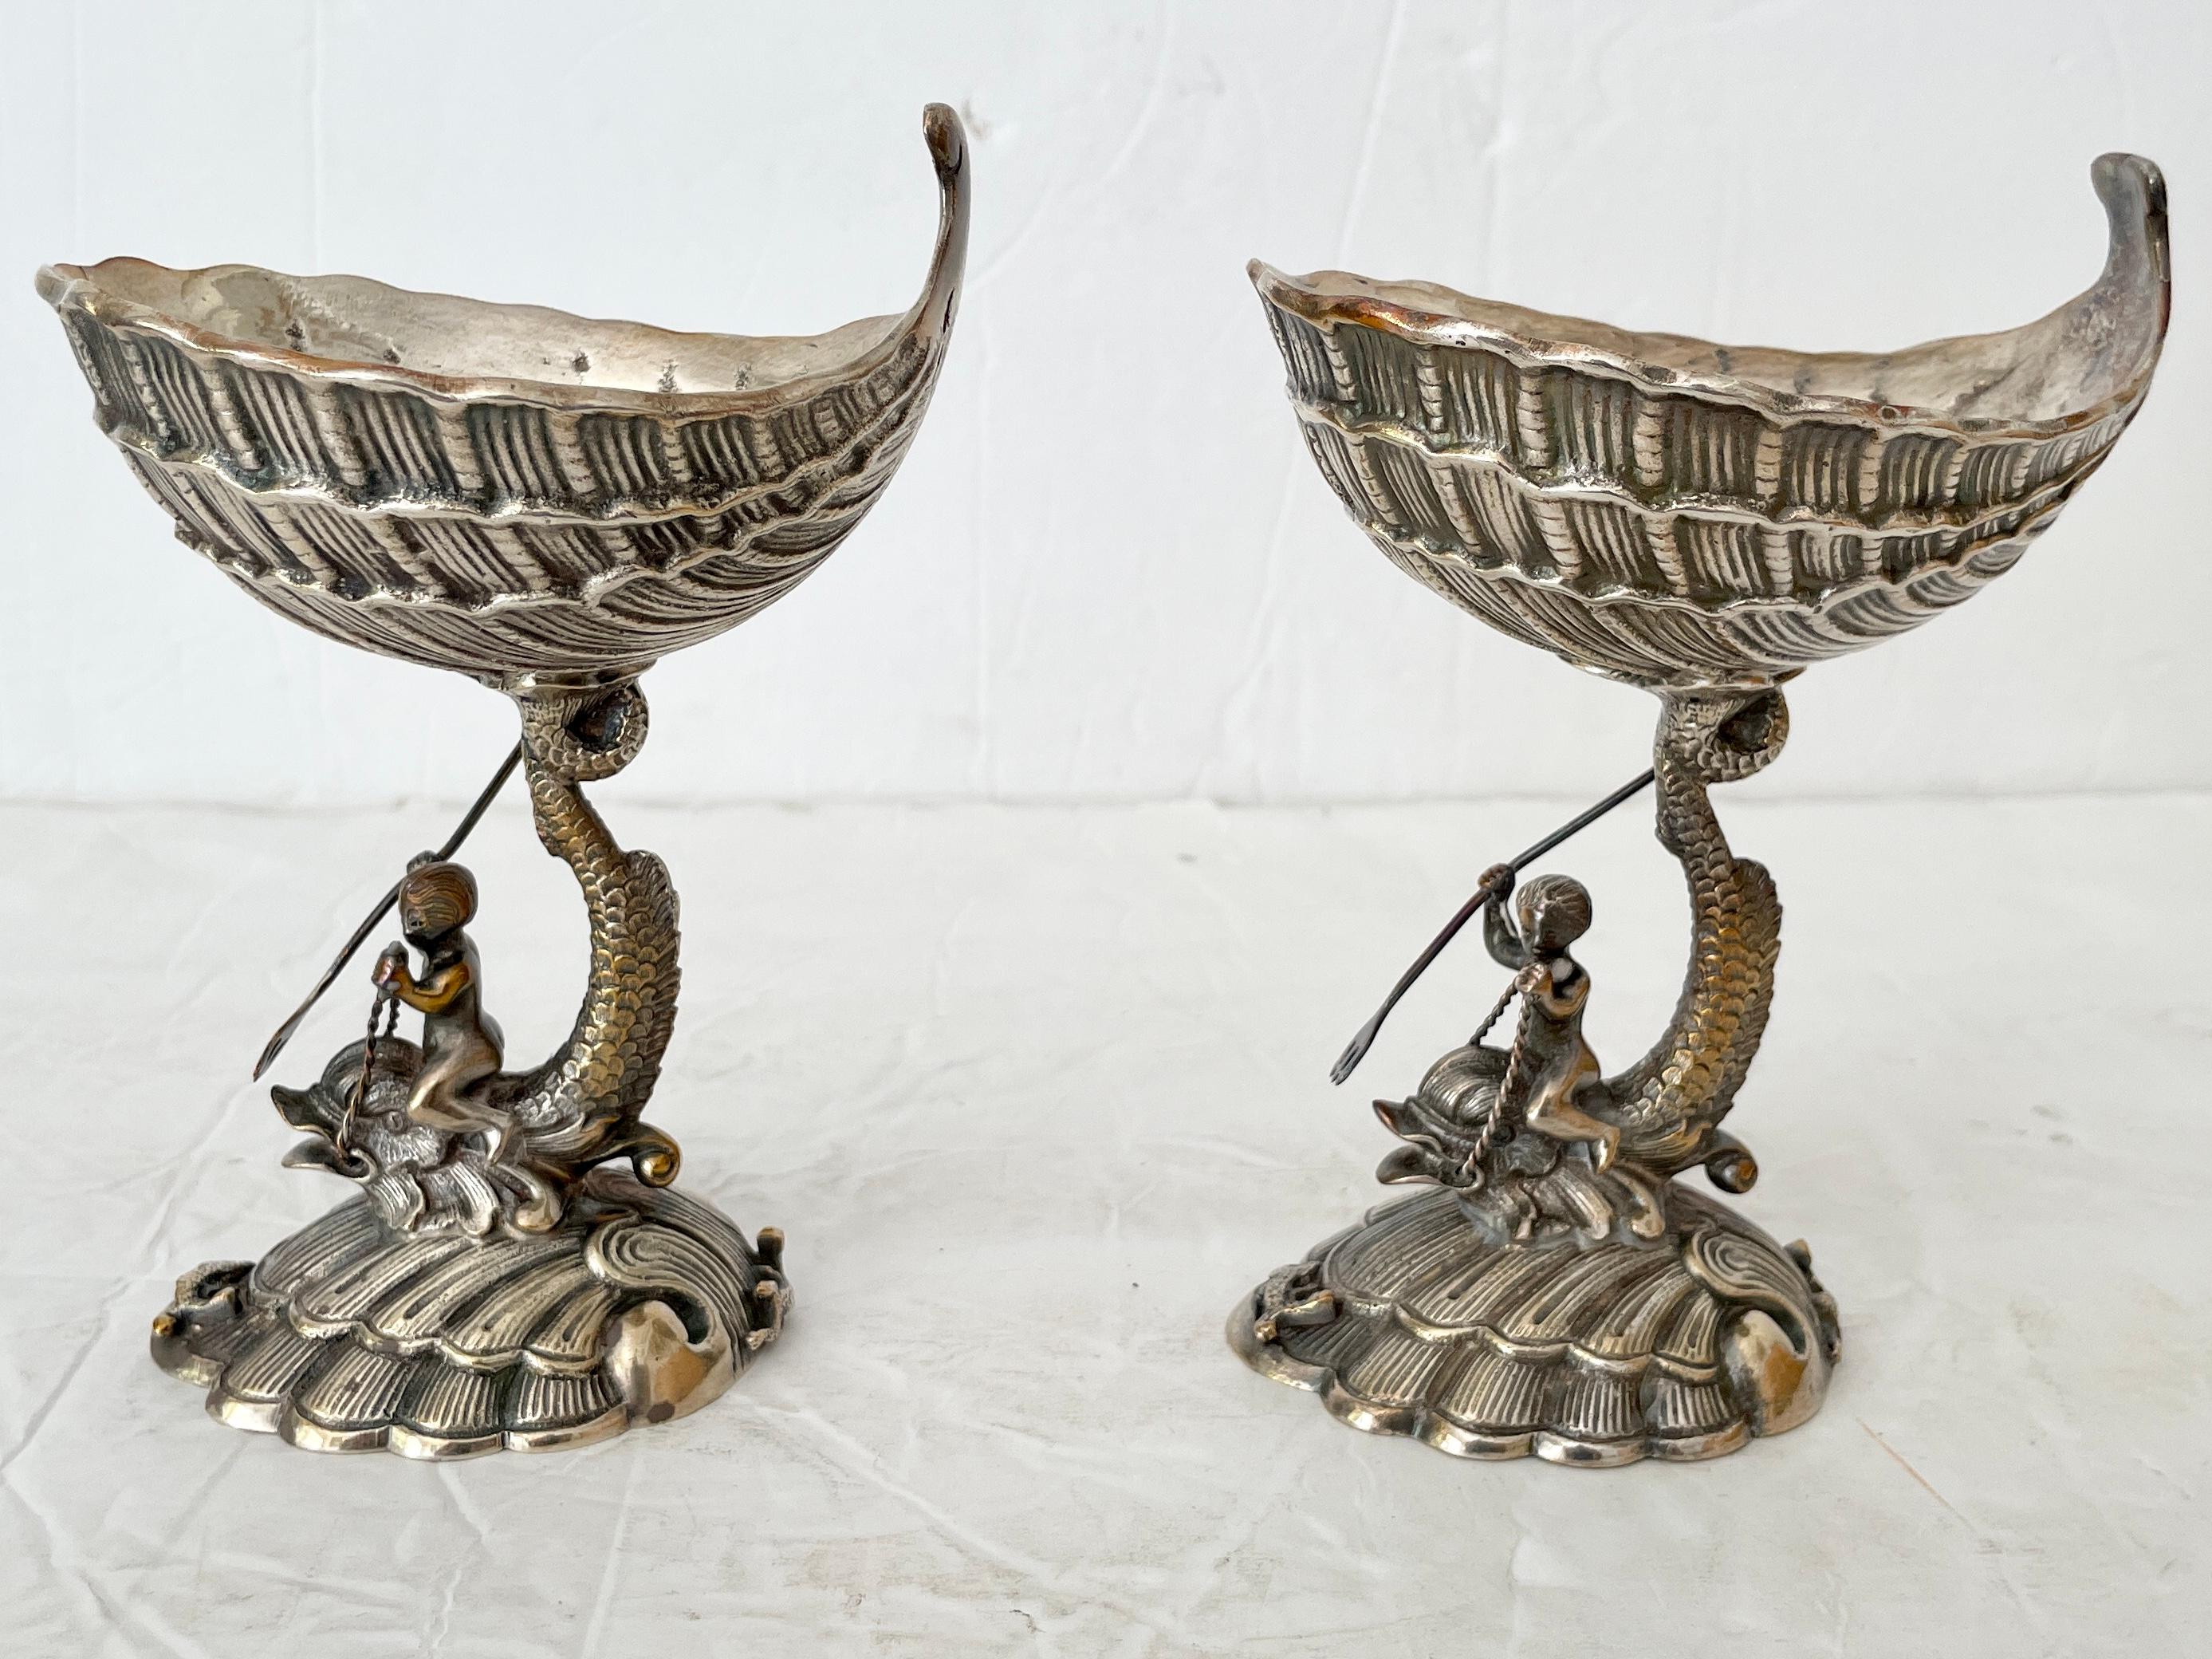 Beautiful pair of metal footed dish grotto style with men riding giant fish hunting figurines. Great carving details.